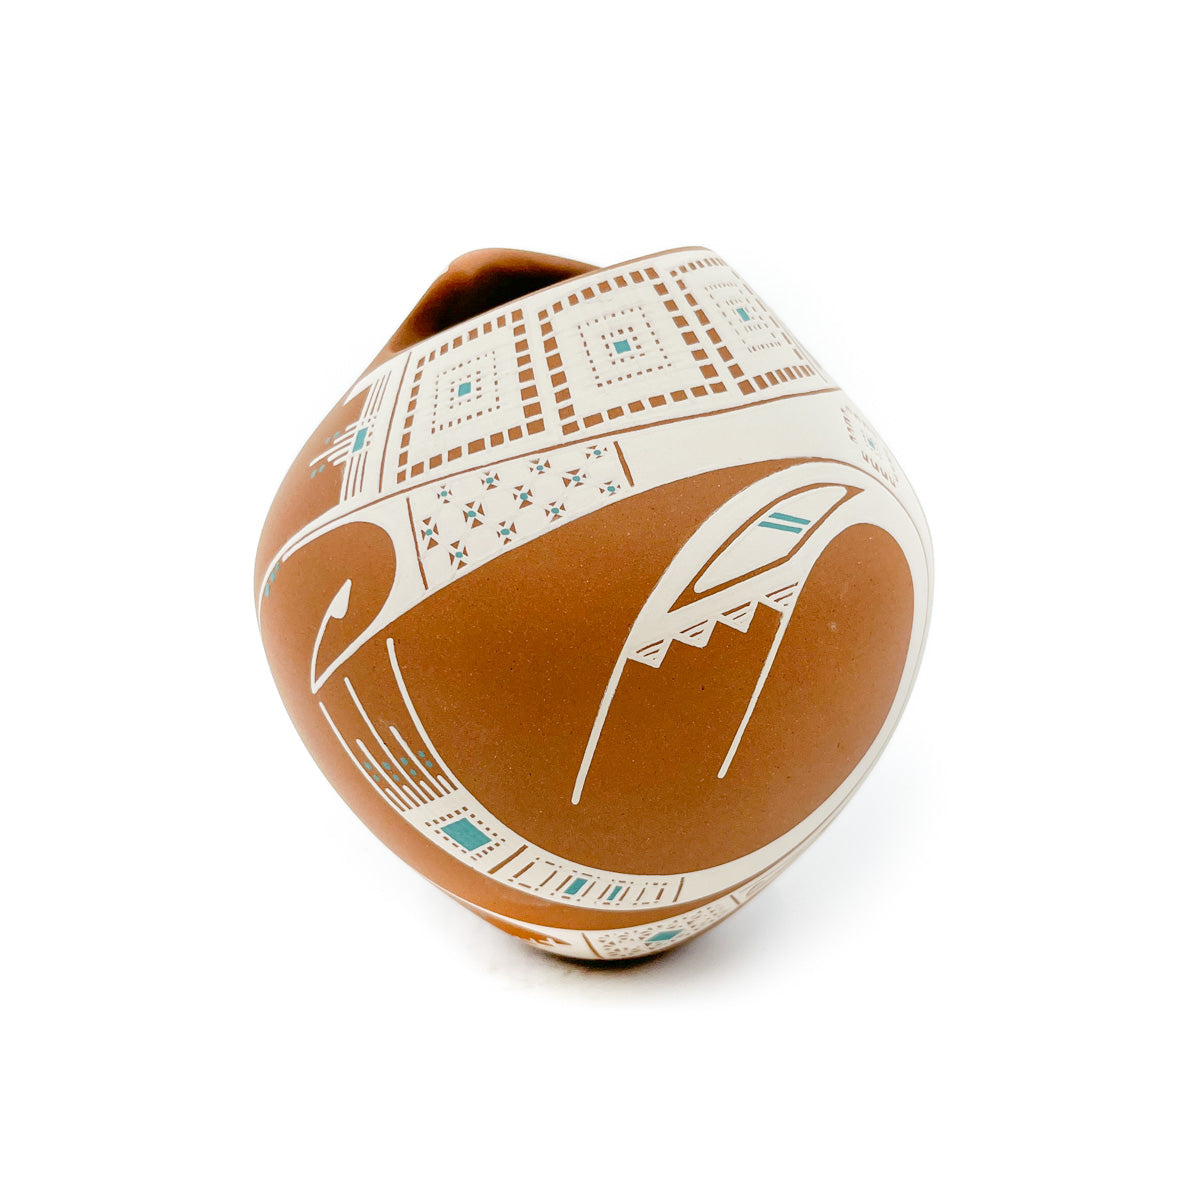 Buff on Red Clay Pot with Geometric Design, Turquoise Colored Accents